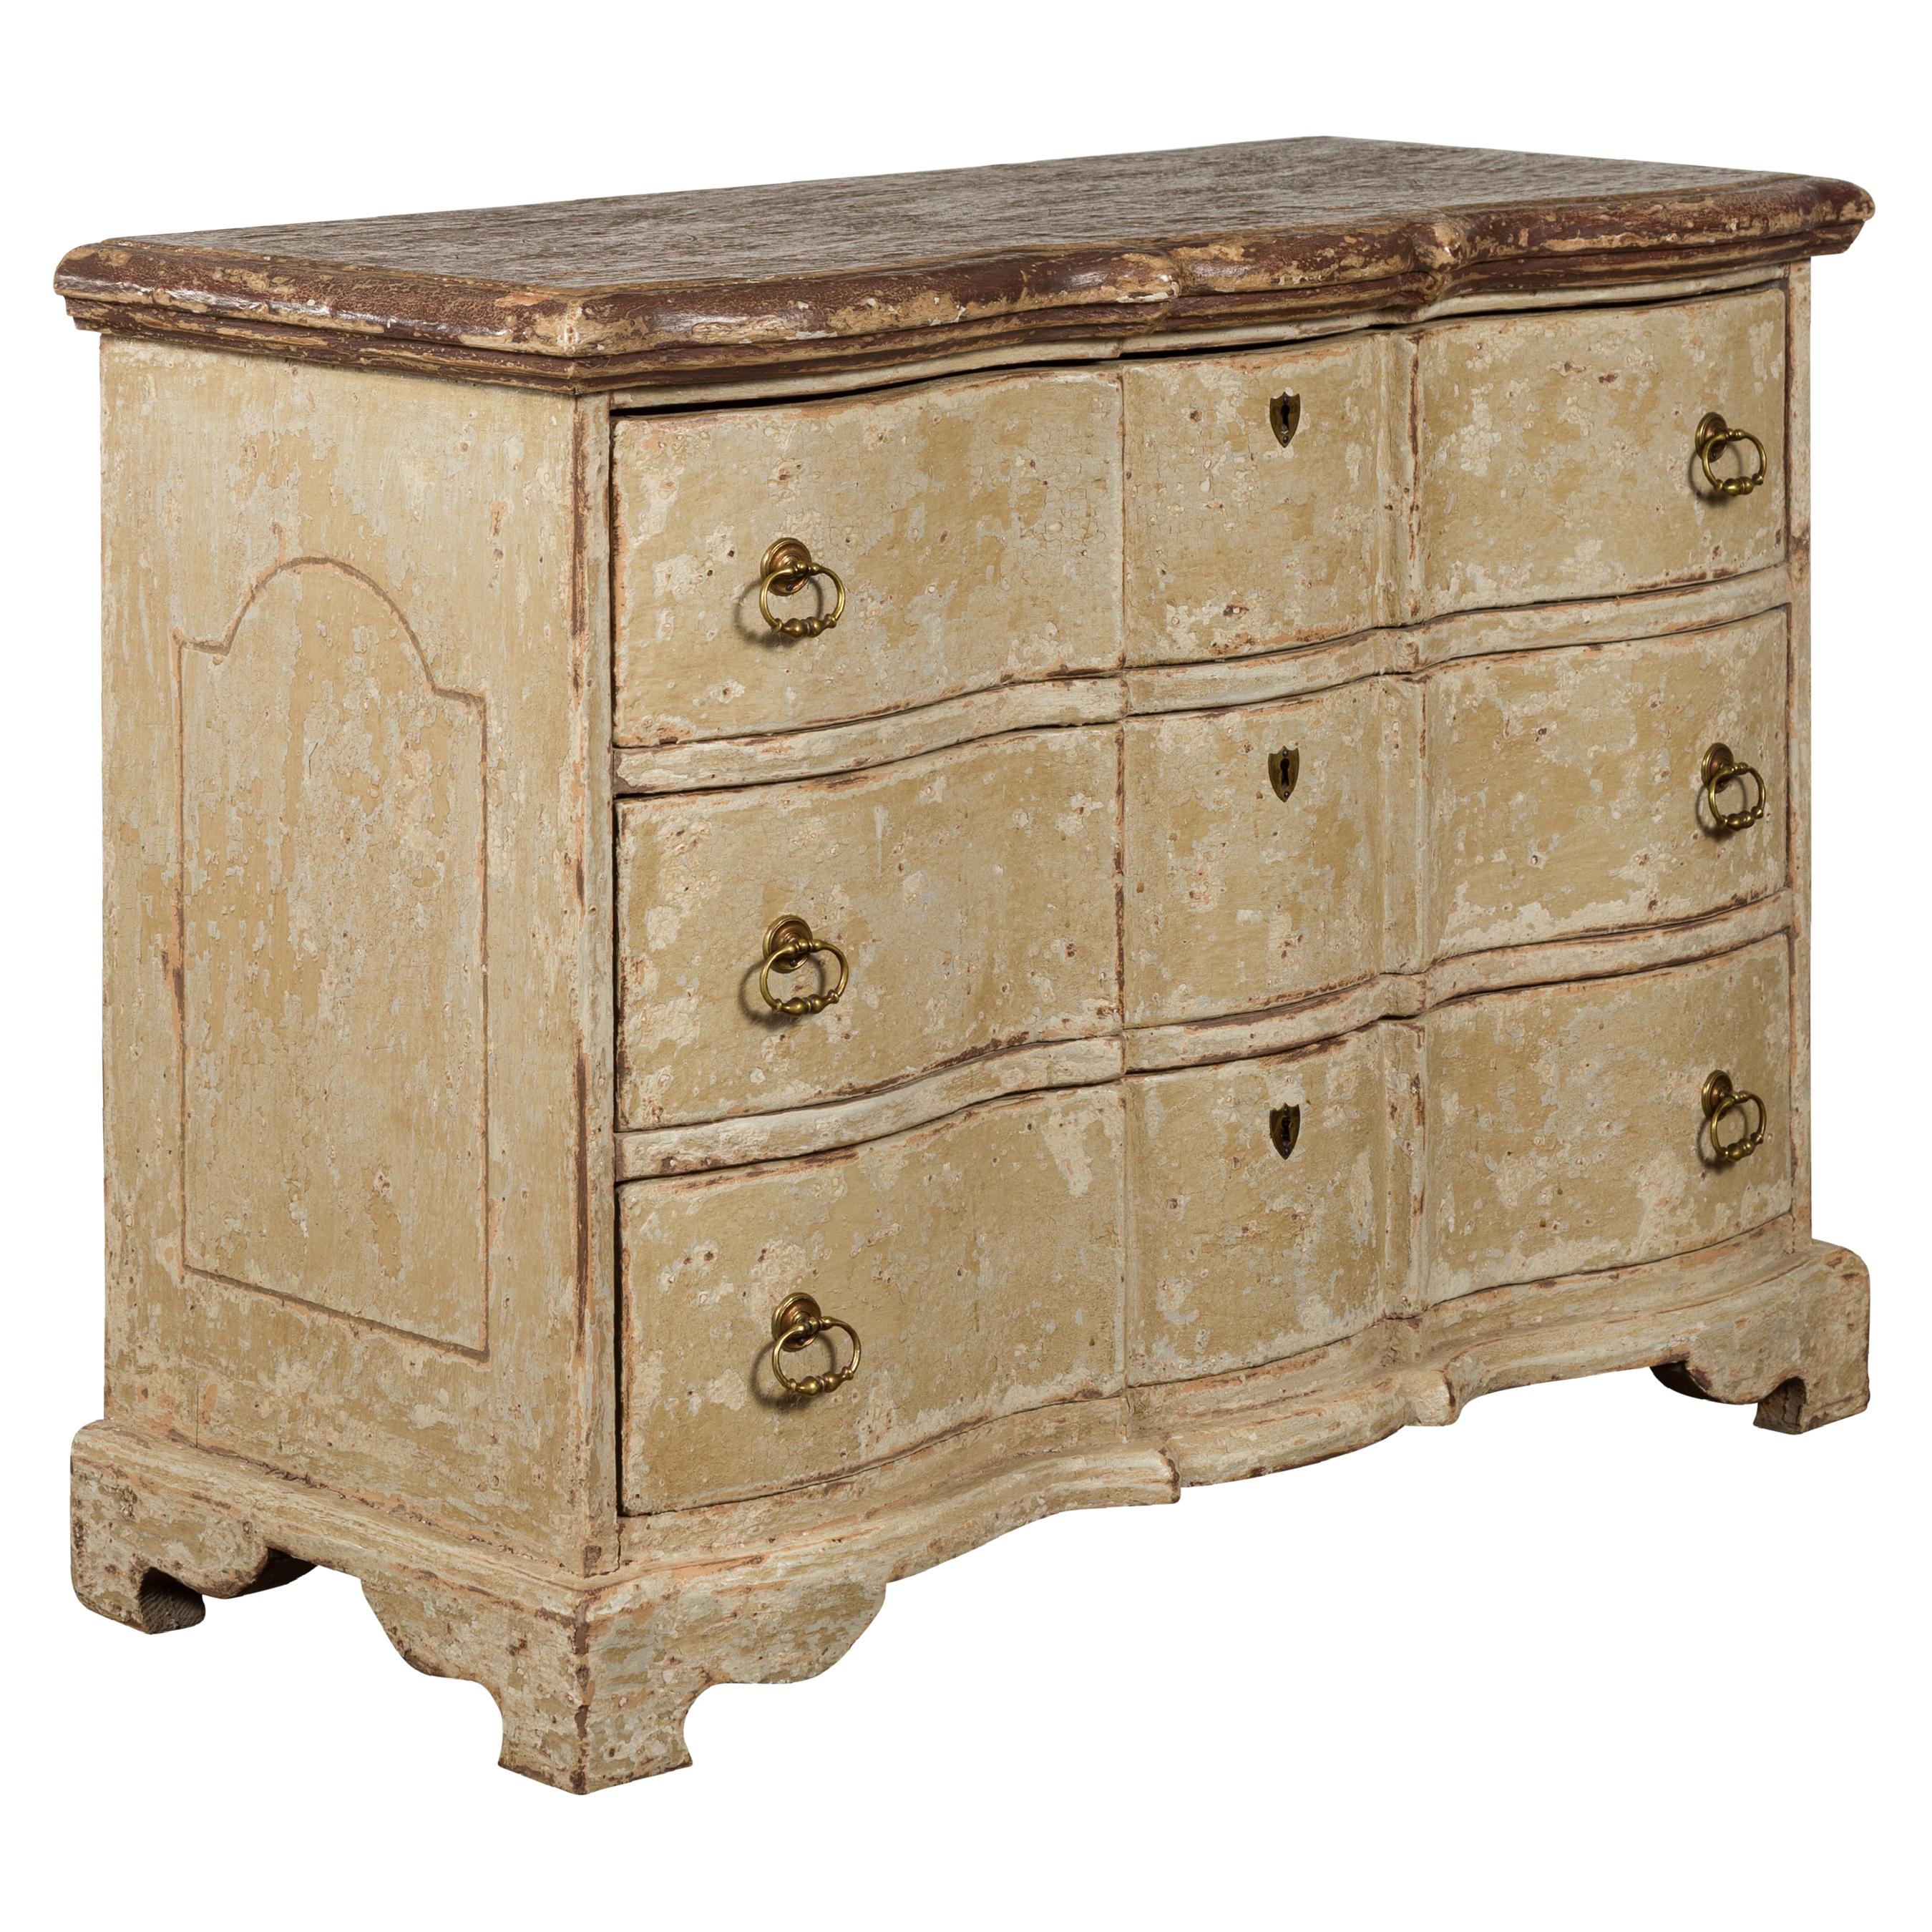 Vintage French Painted Serpentine Three-Drawer Commode with Distressed Finish